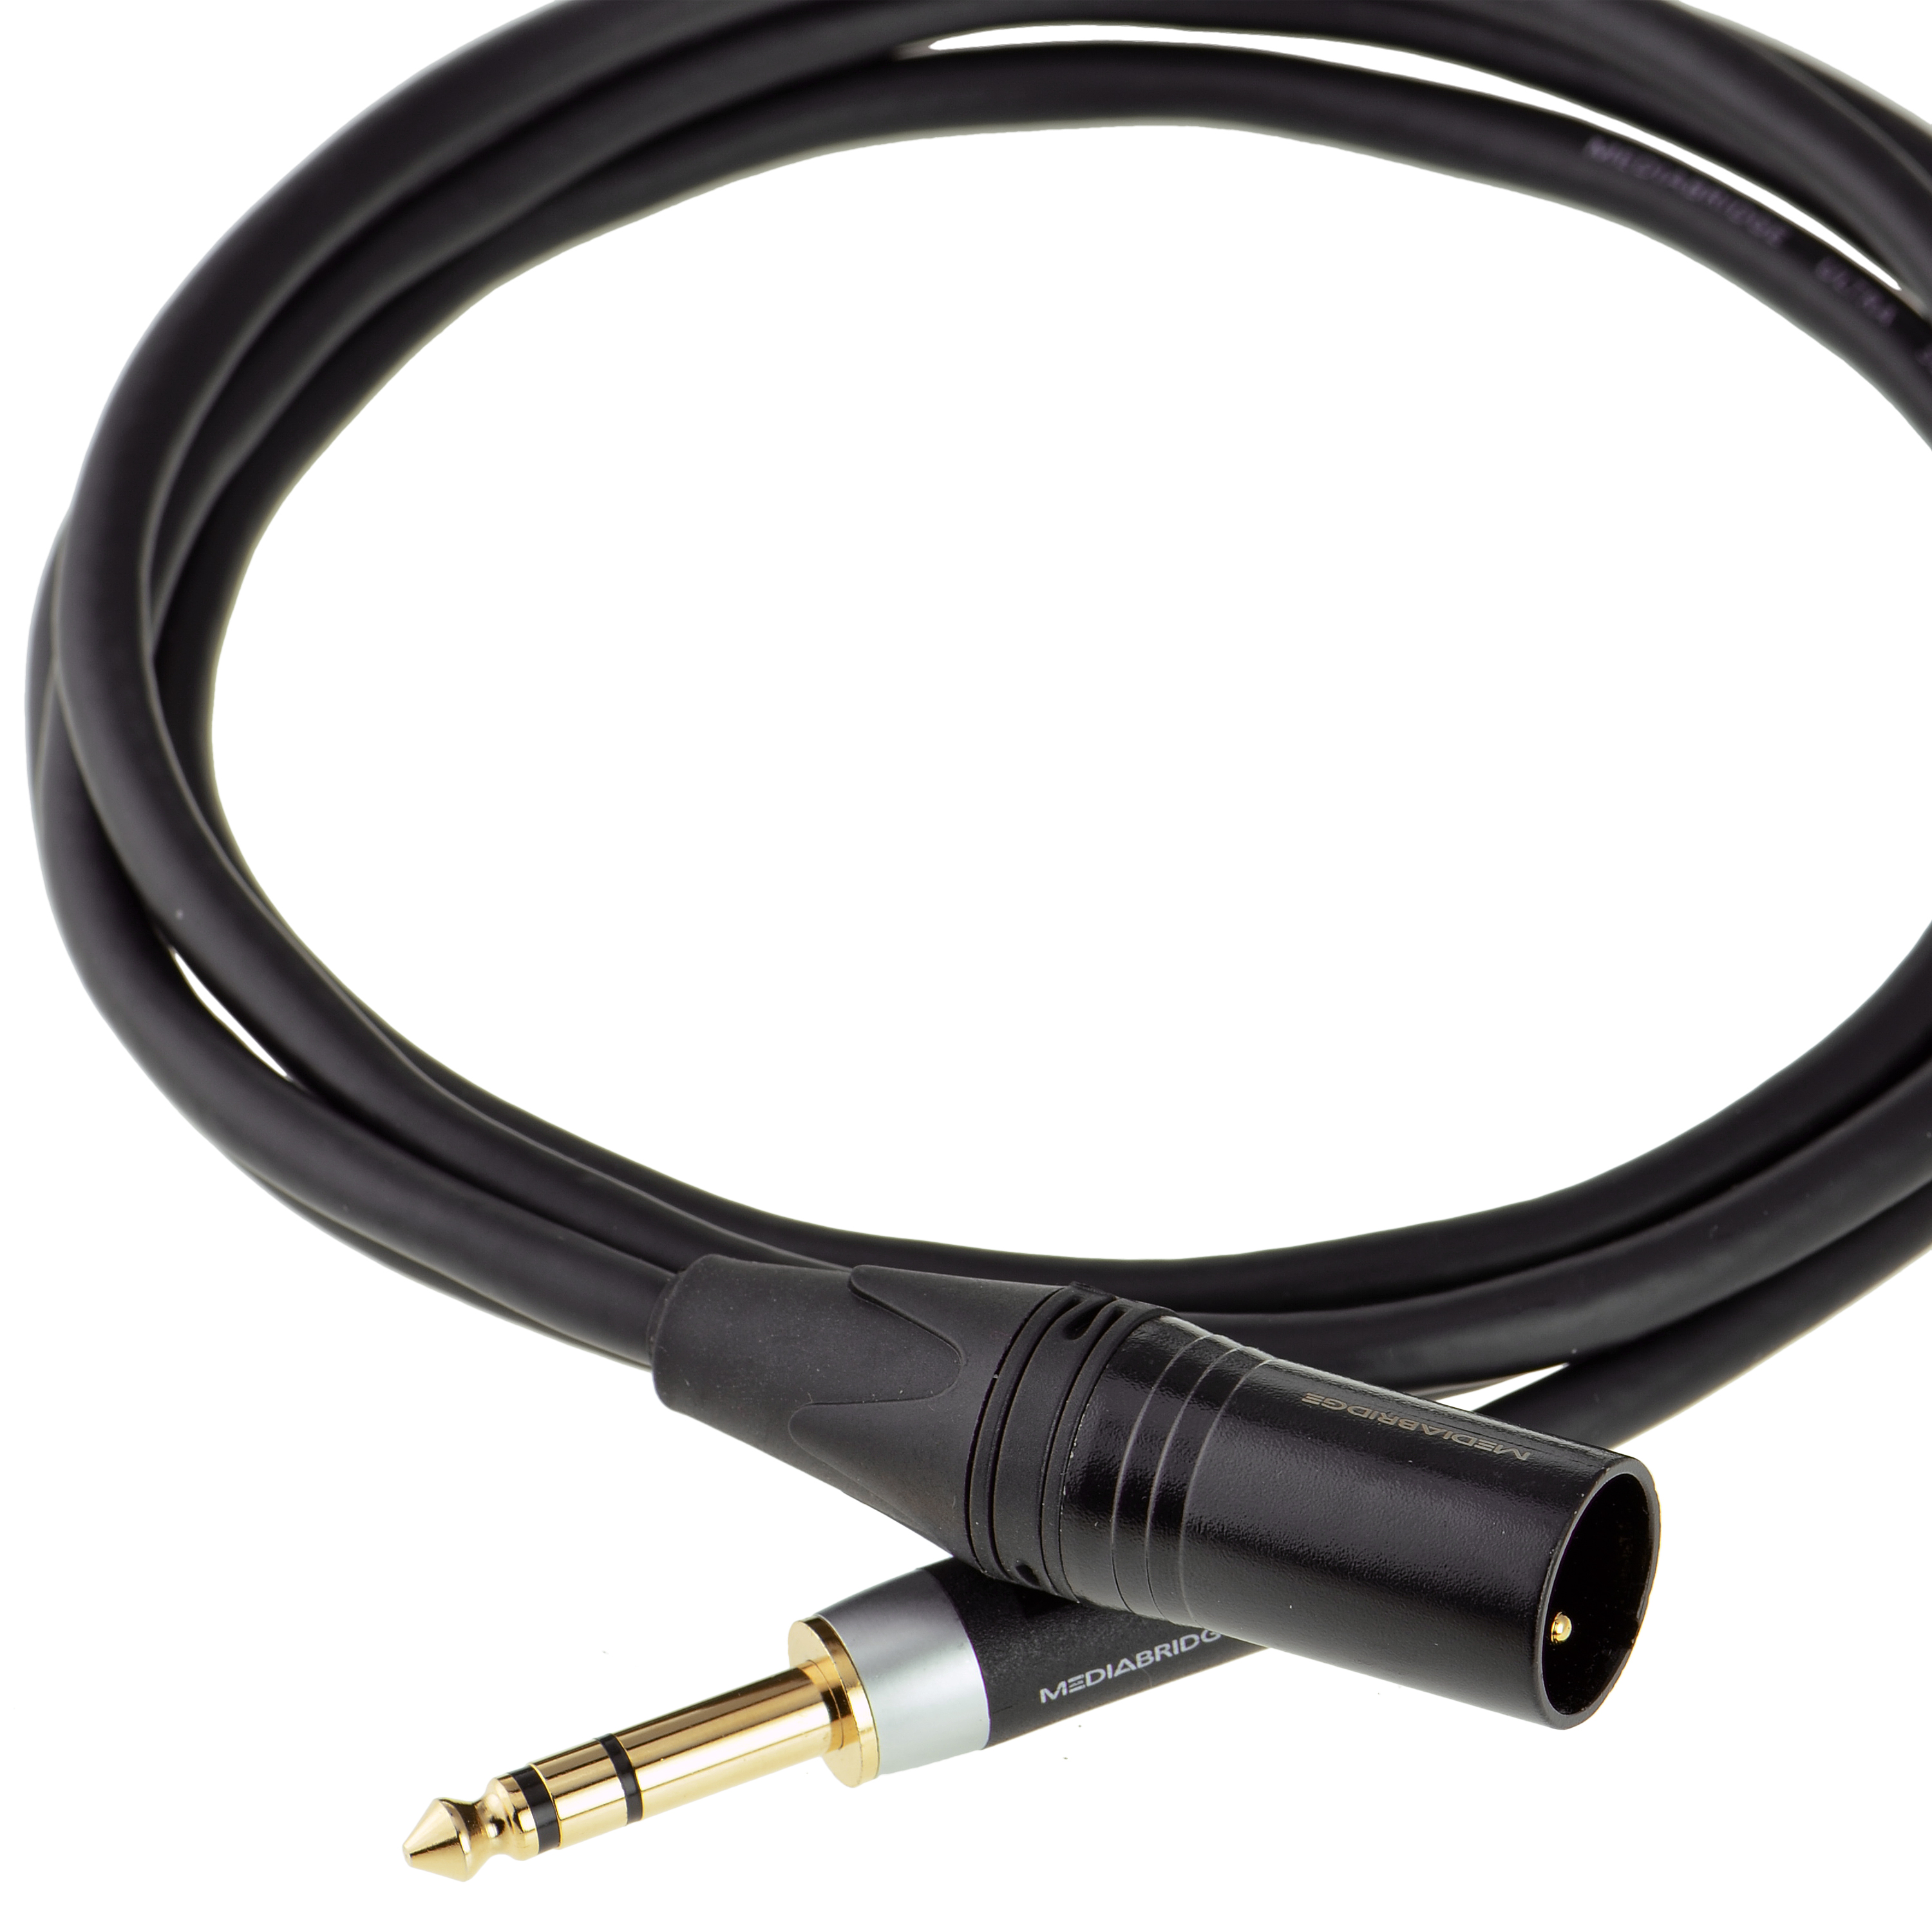 Shop New Ultra Series XLR Male to 1/4 Inch TRS Cable (6 Feet) Mediabridge Products